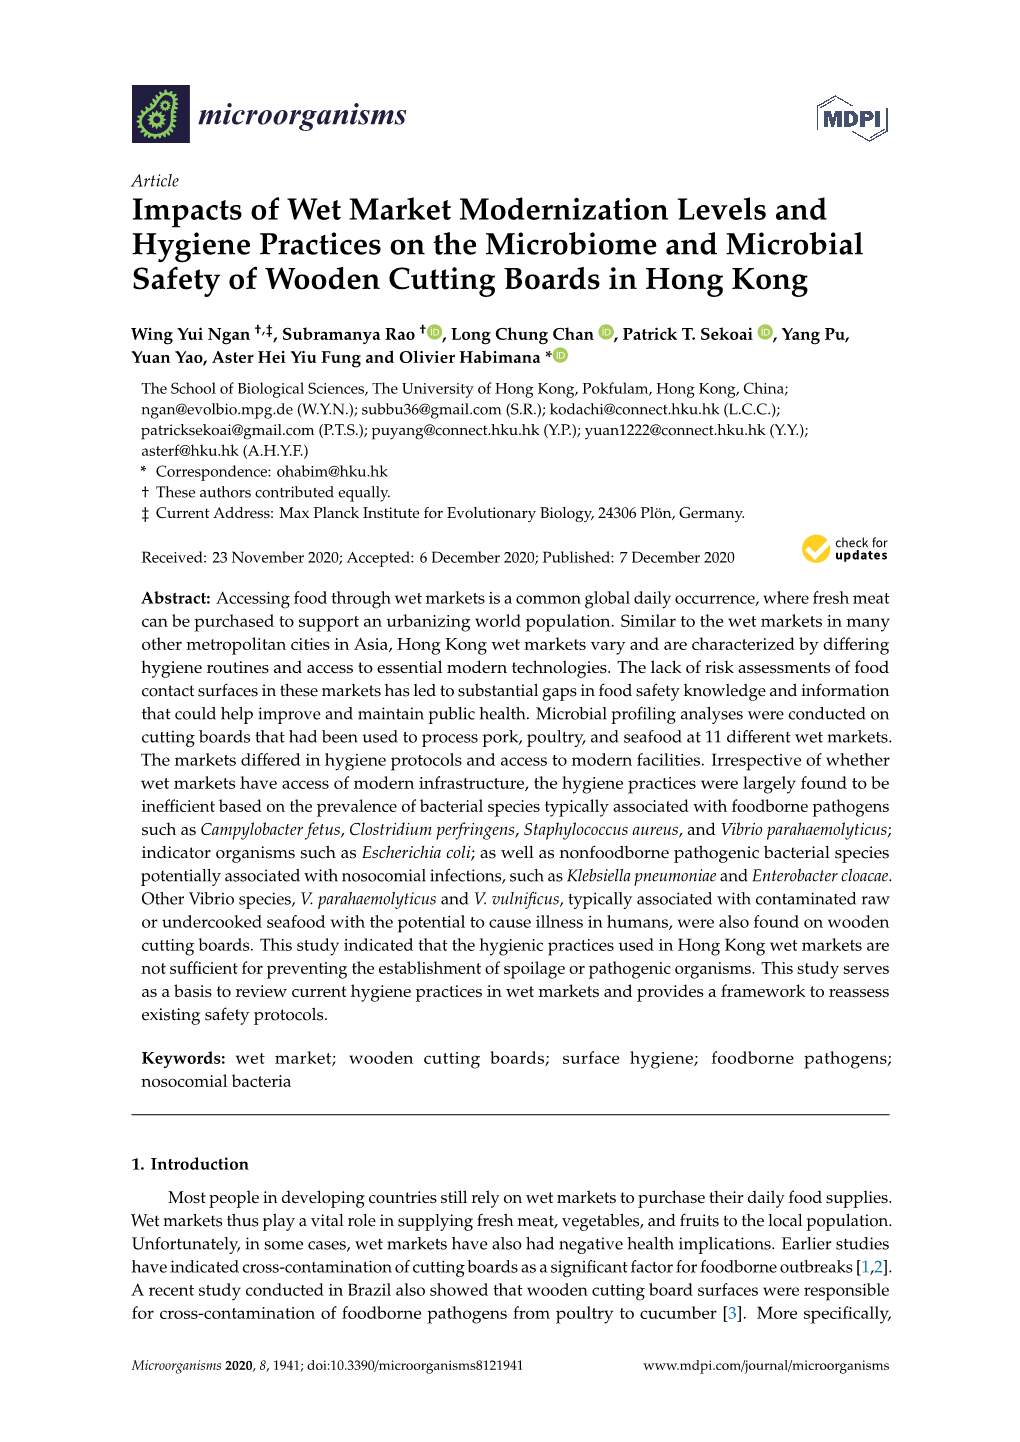 Impacts of Wet Market Modernization Levels and Hygiene Practices on the Microbiome and Microbial Safety of Wooden Cutting Boards in Hong Kong